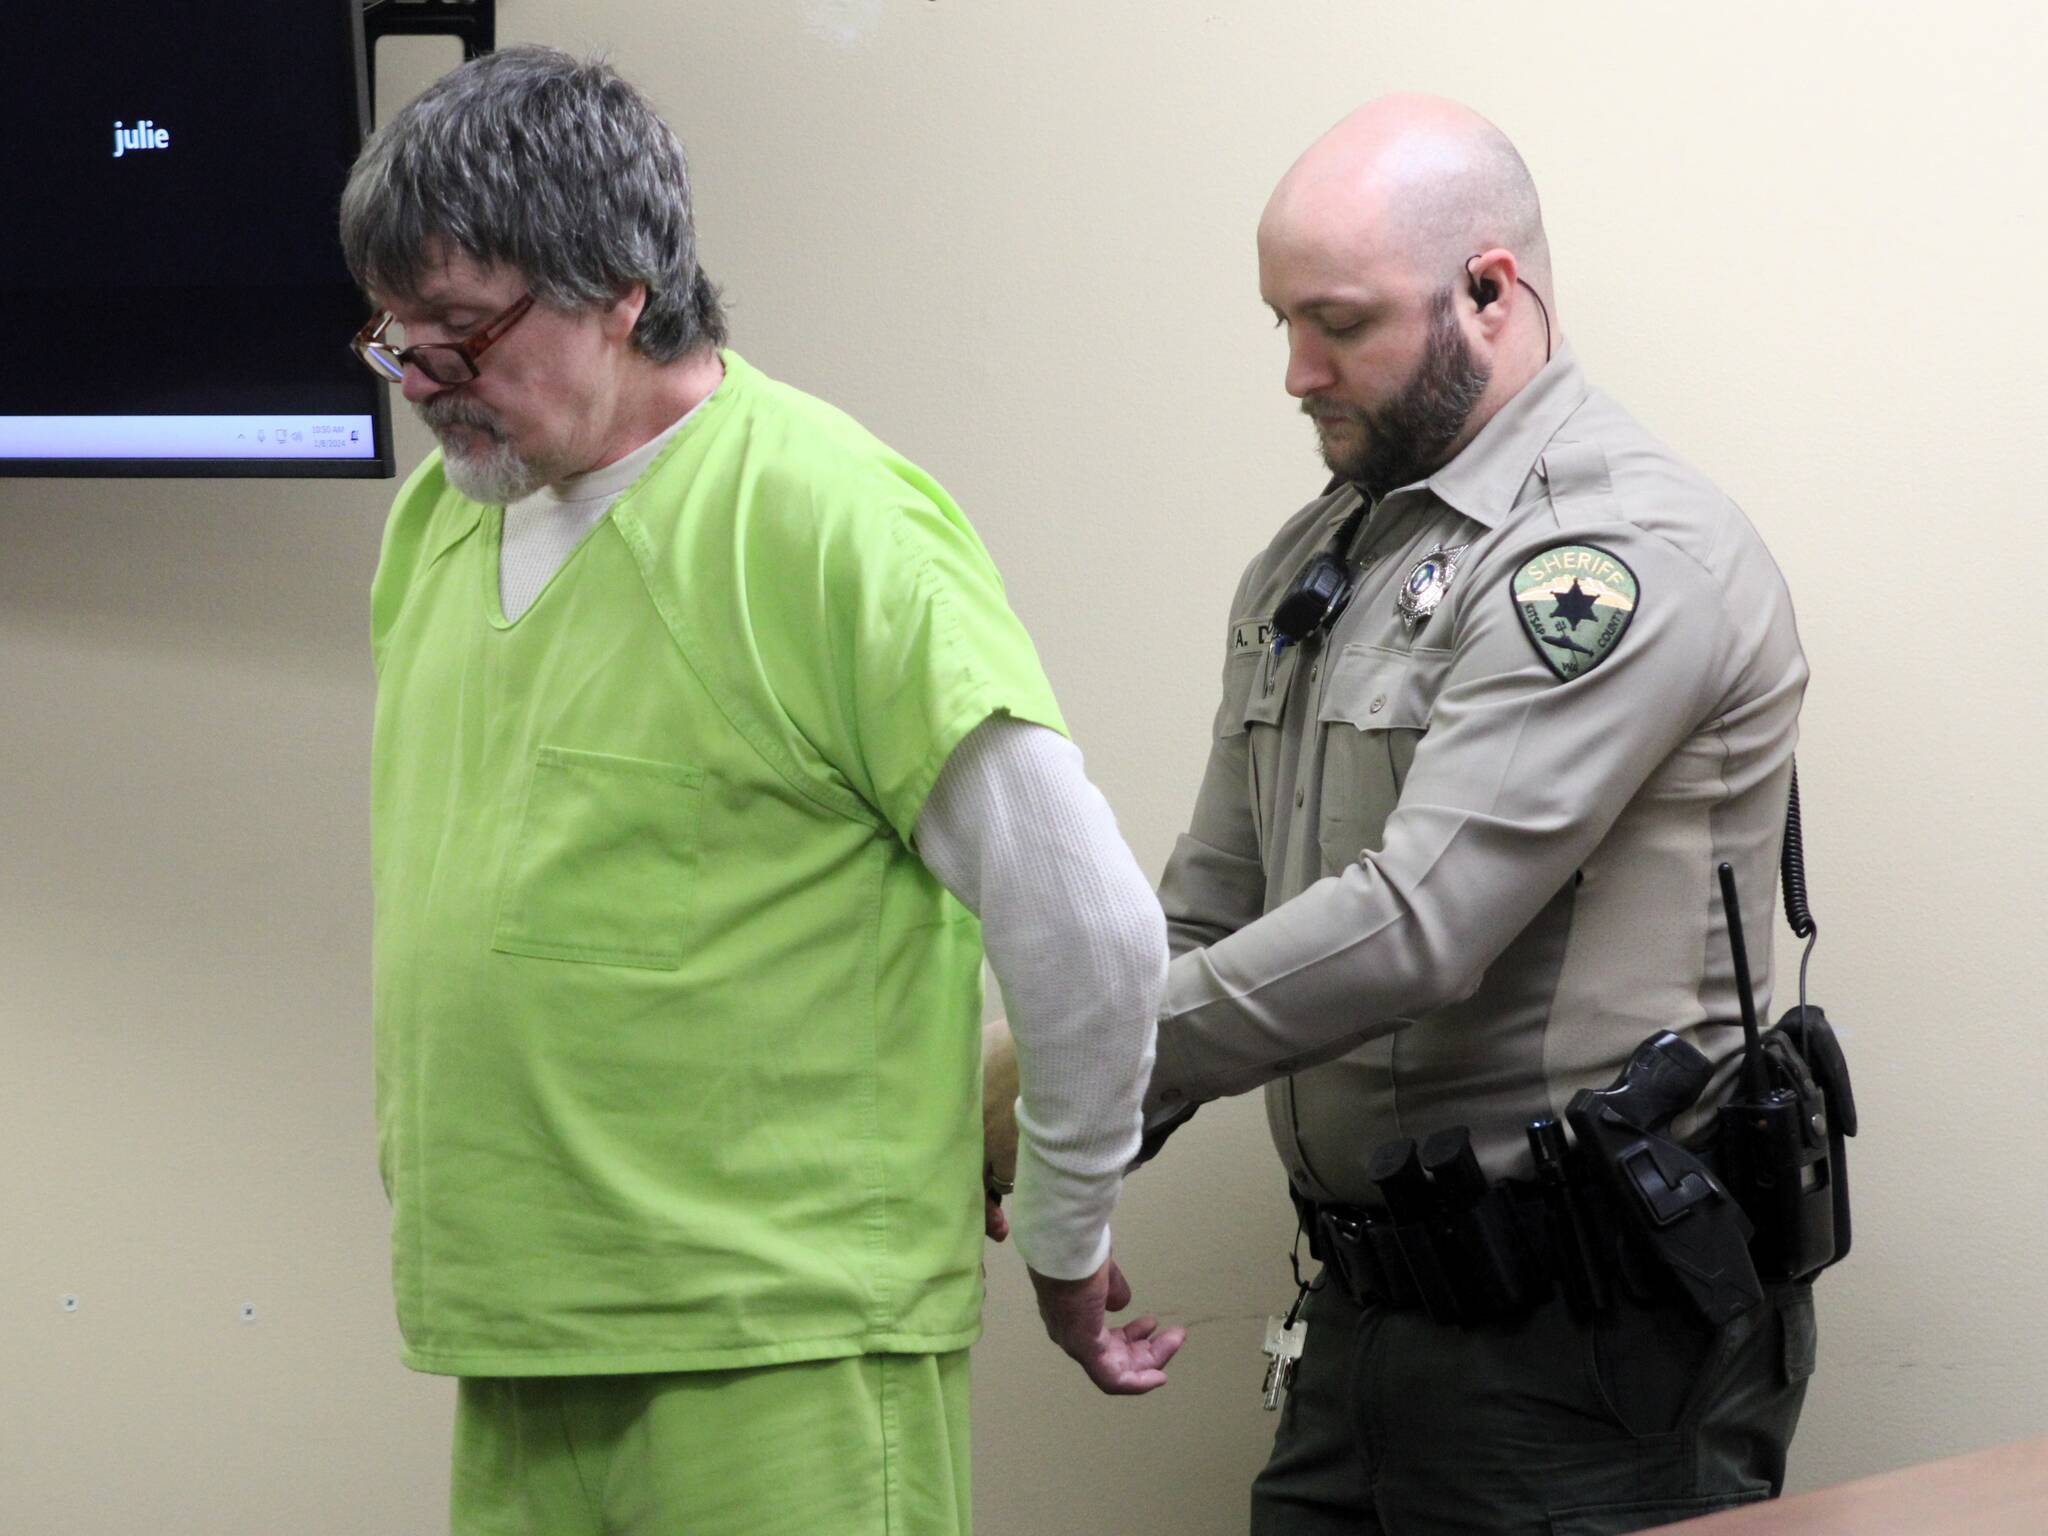 Elisha Meyer/Kitsap News Group Photos
Chet Weese is led into the courtroom to plead guilty and face his sentencing.